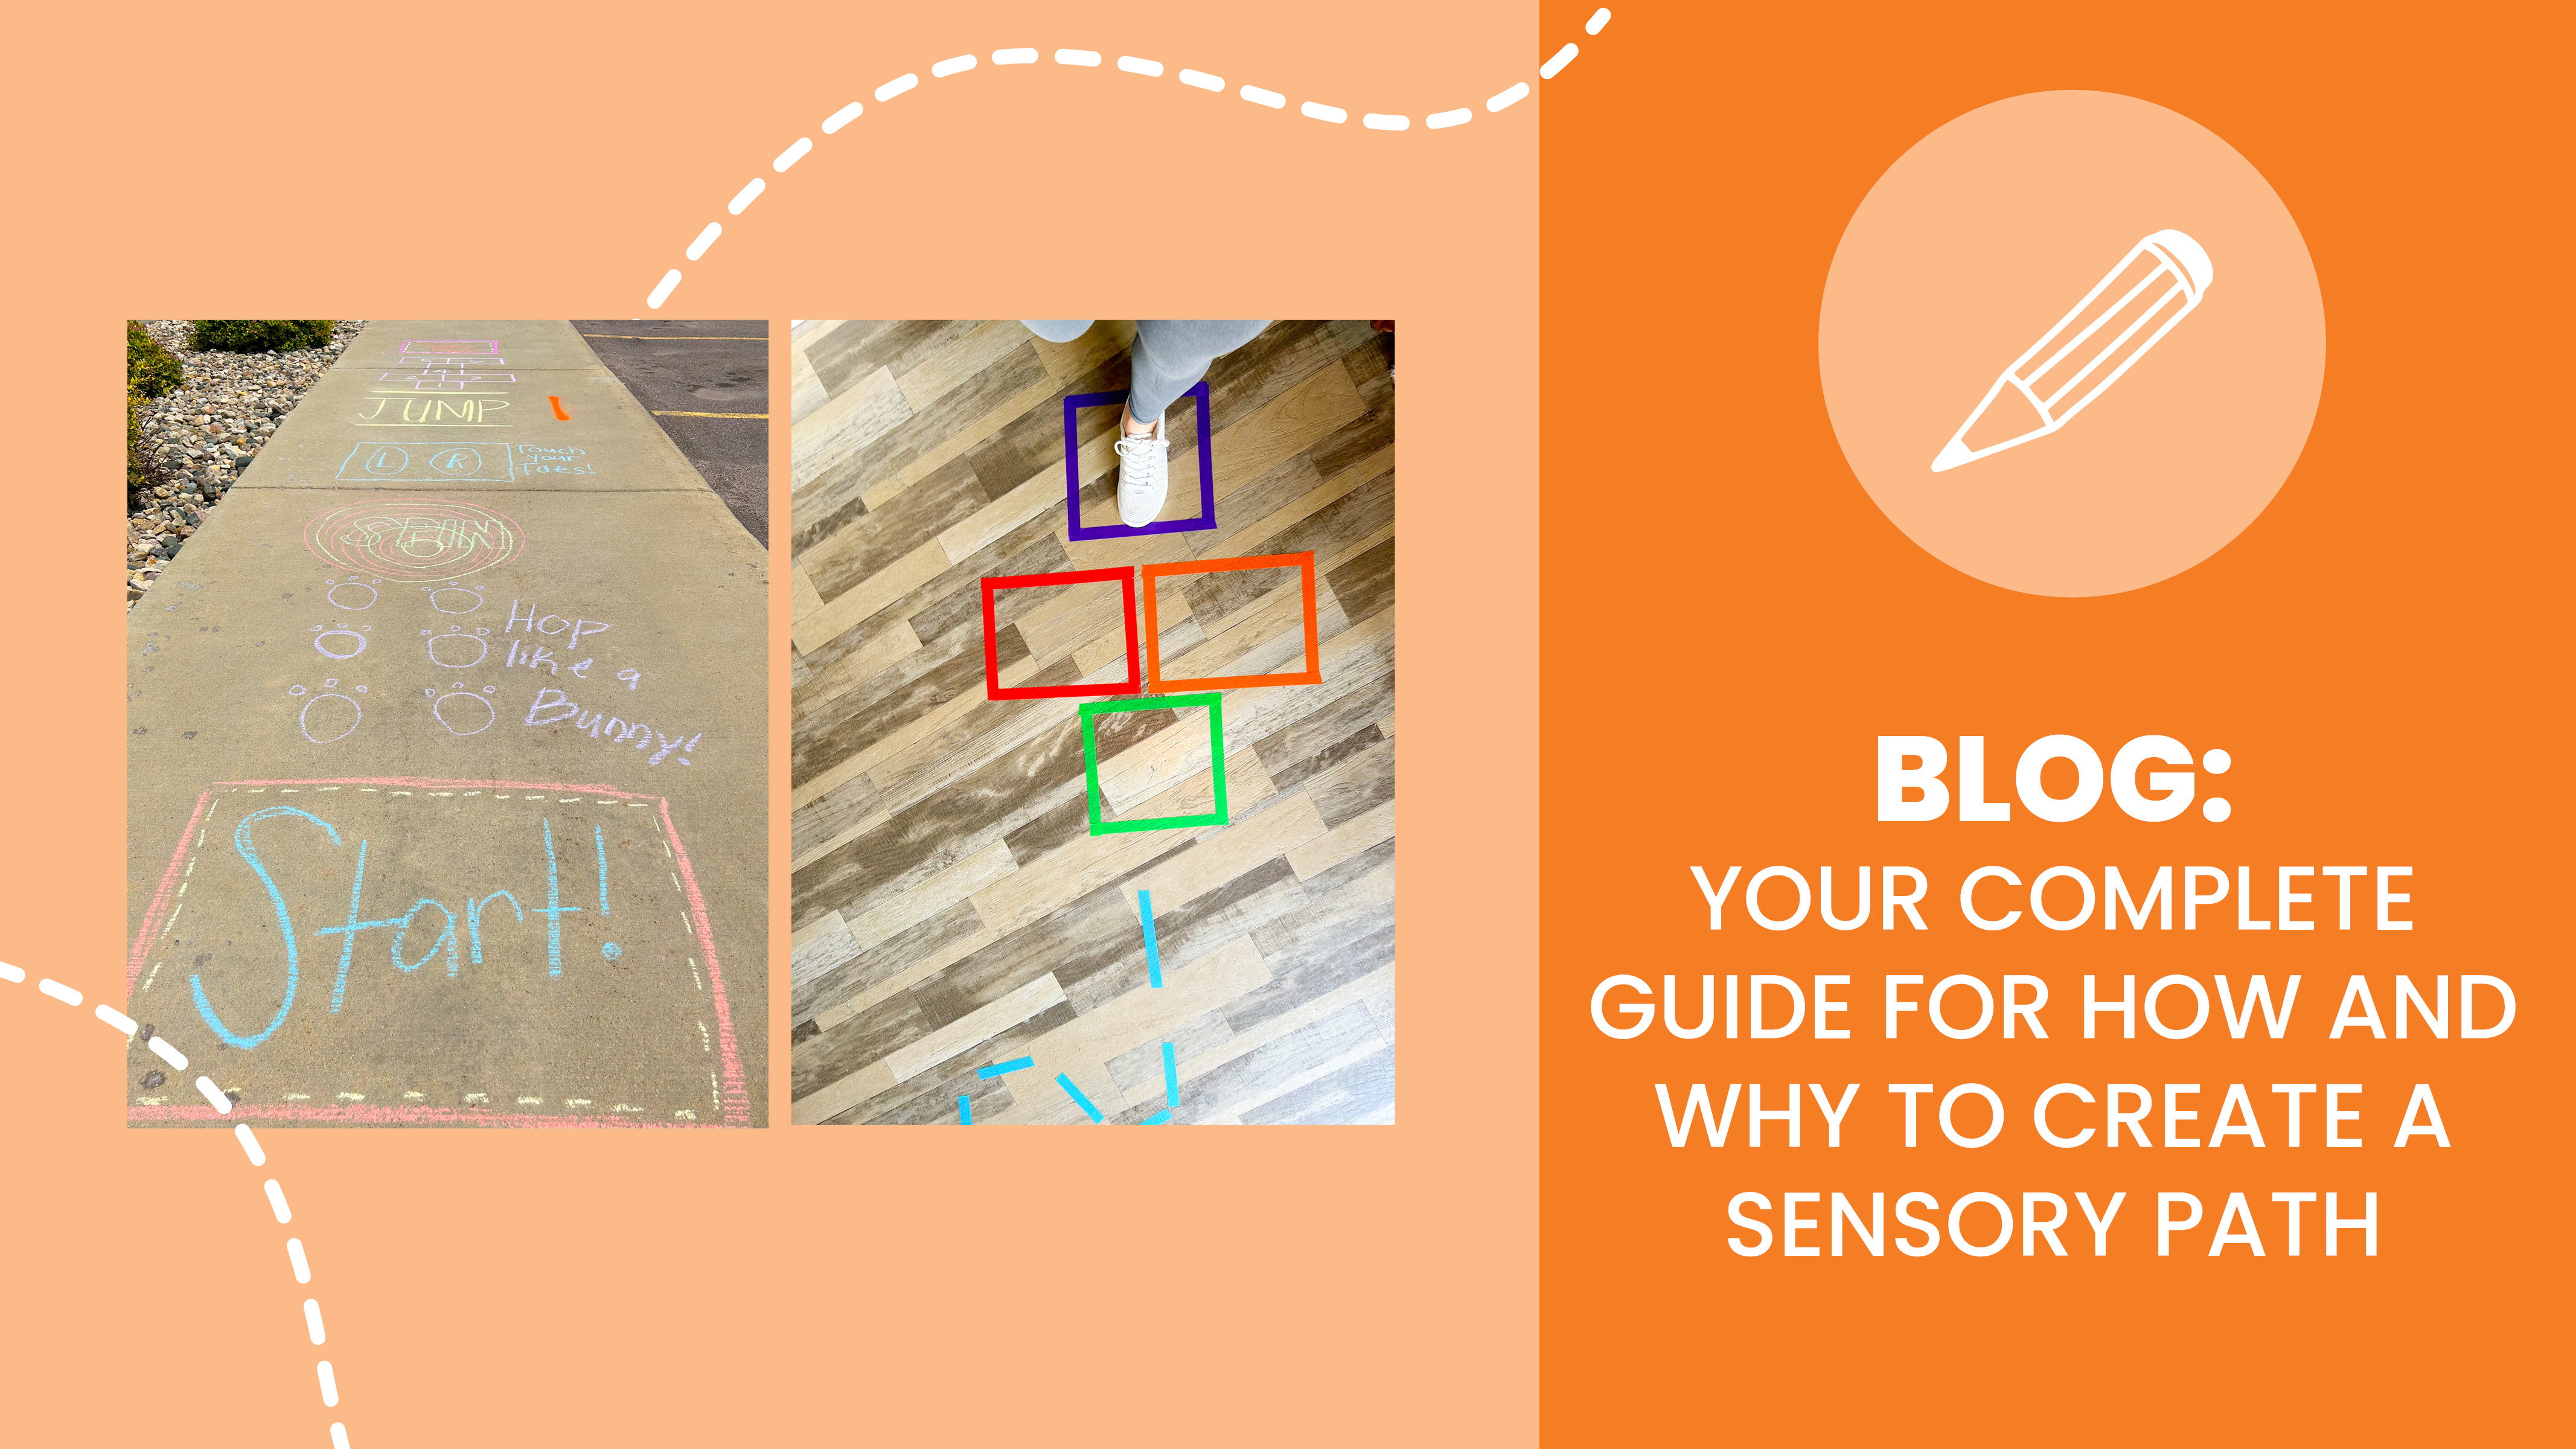 UGC of chalk and tape sensory paths - Sanford fit